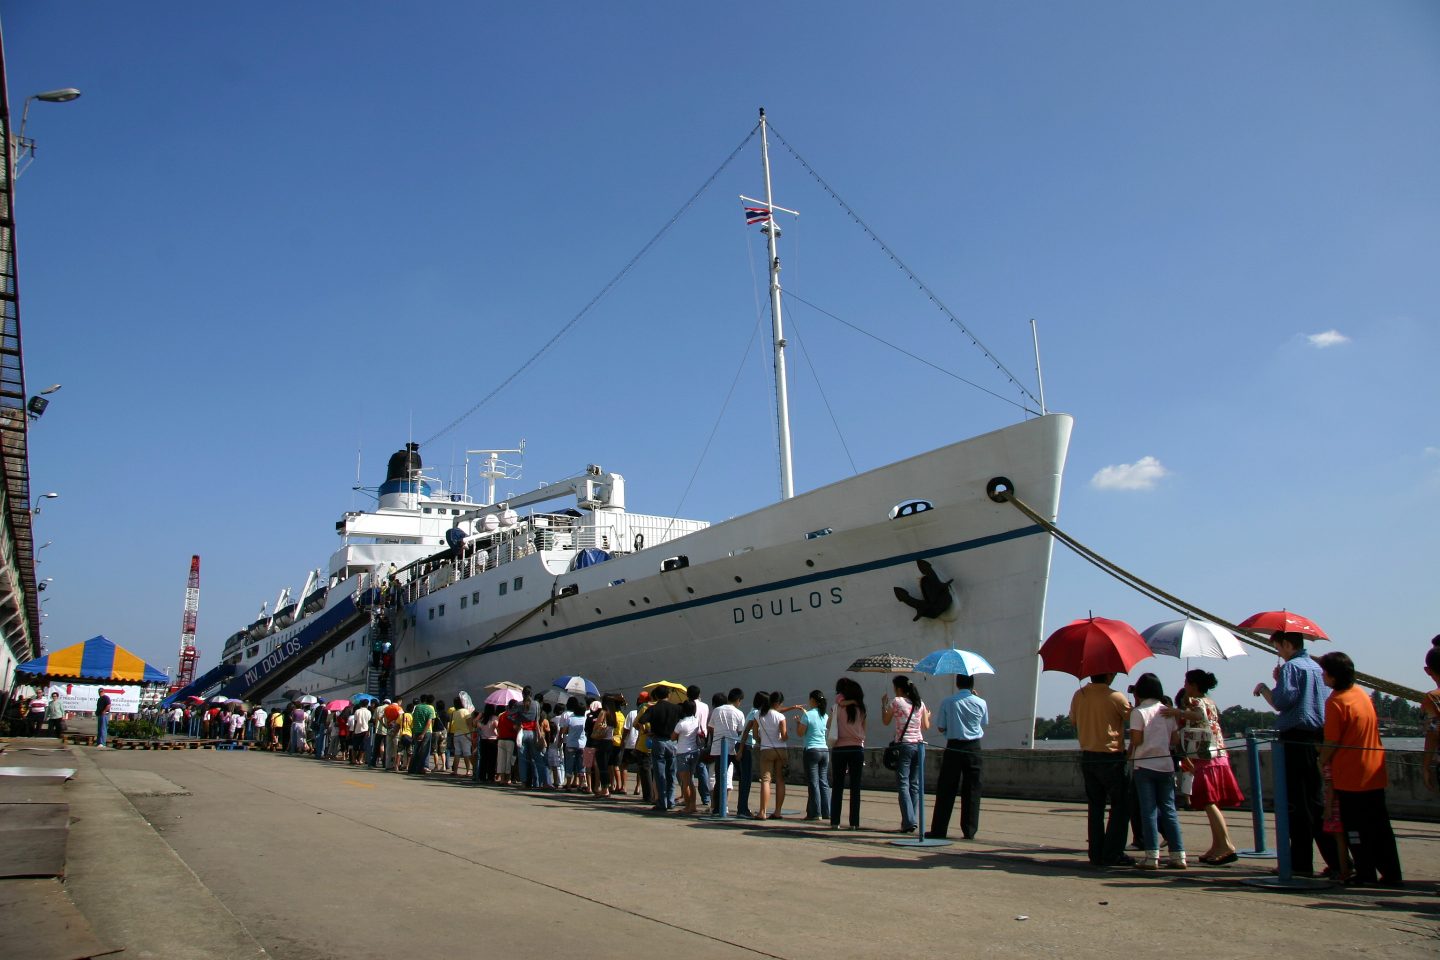 The MV Doulos attracting crowds at the ports it visits. In all, the Doulos has received over 22 million visitors in over its 32 years of service. Photo by Stephanie Vaupel (OM).